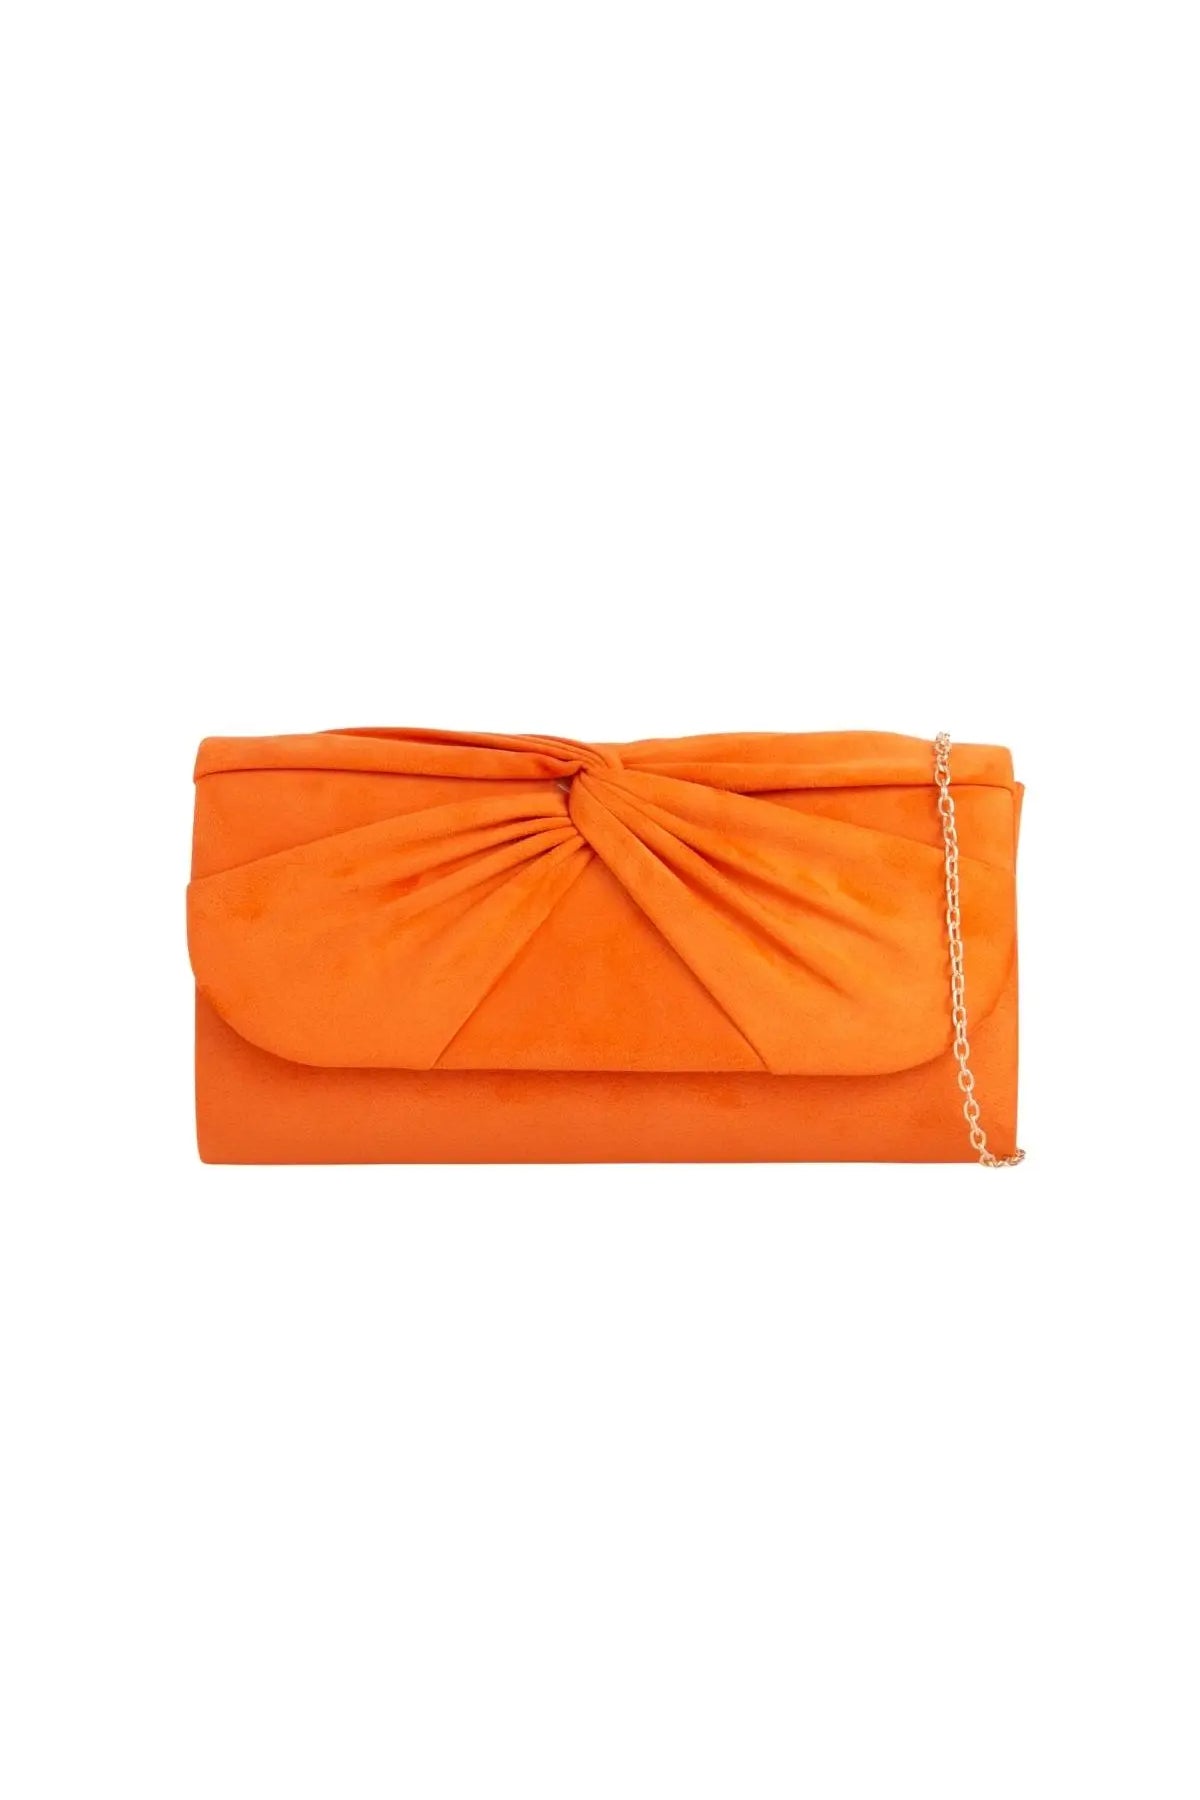 Orange Suede Clutch Bag with Knot Detail